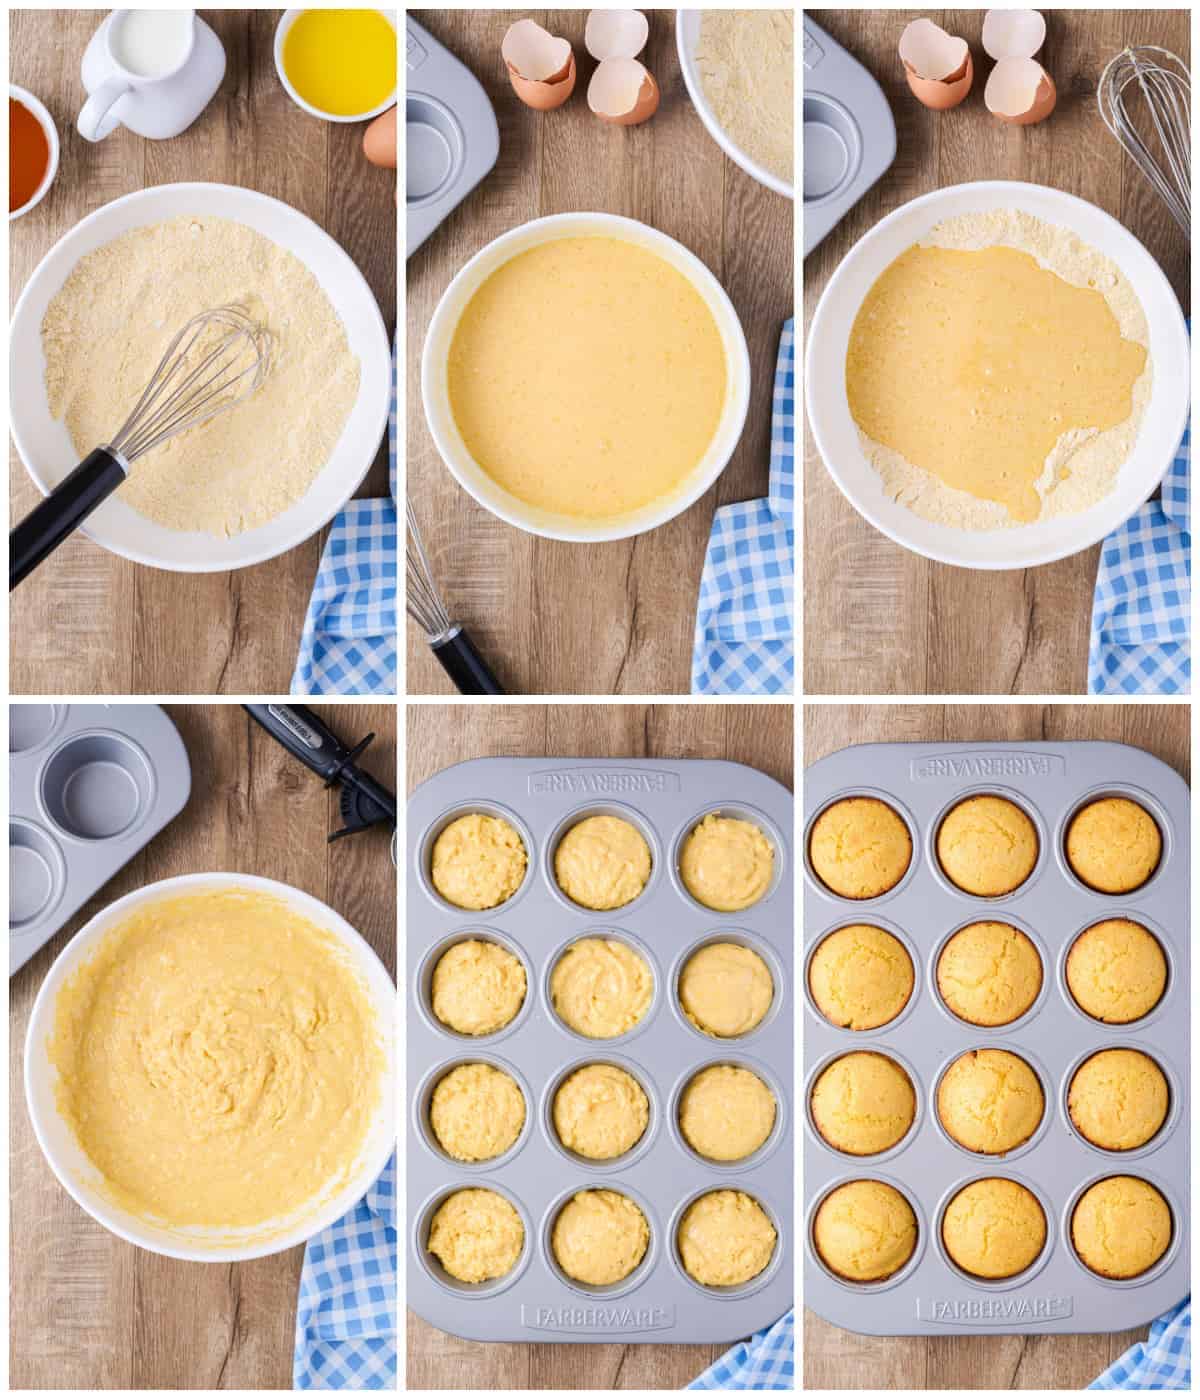 Step by step photos on how to make Cornbread Muffins.